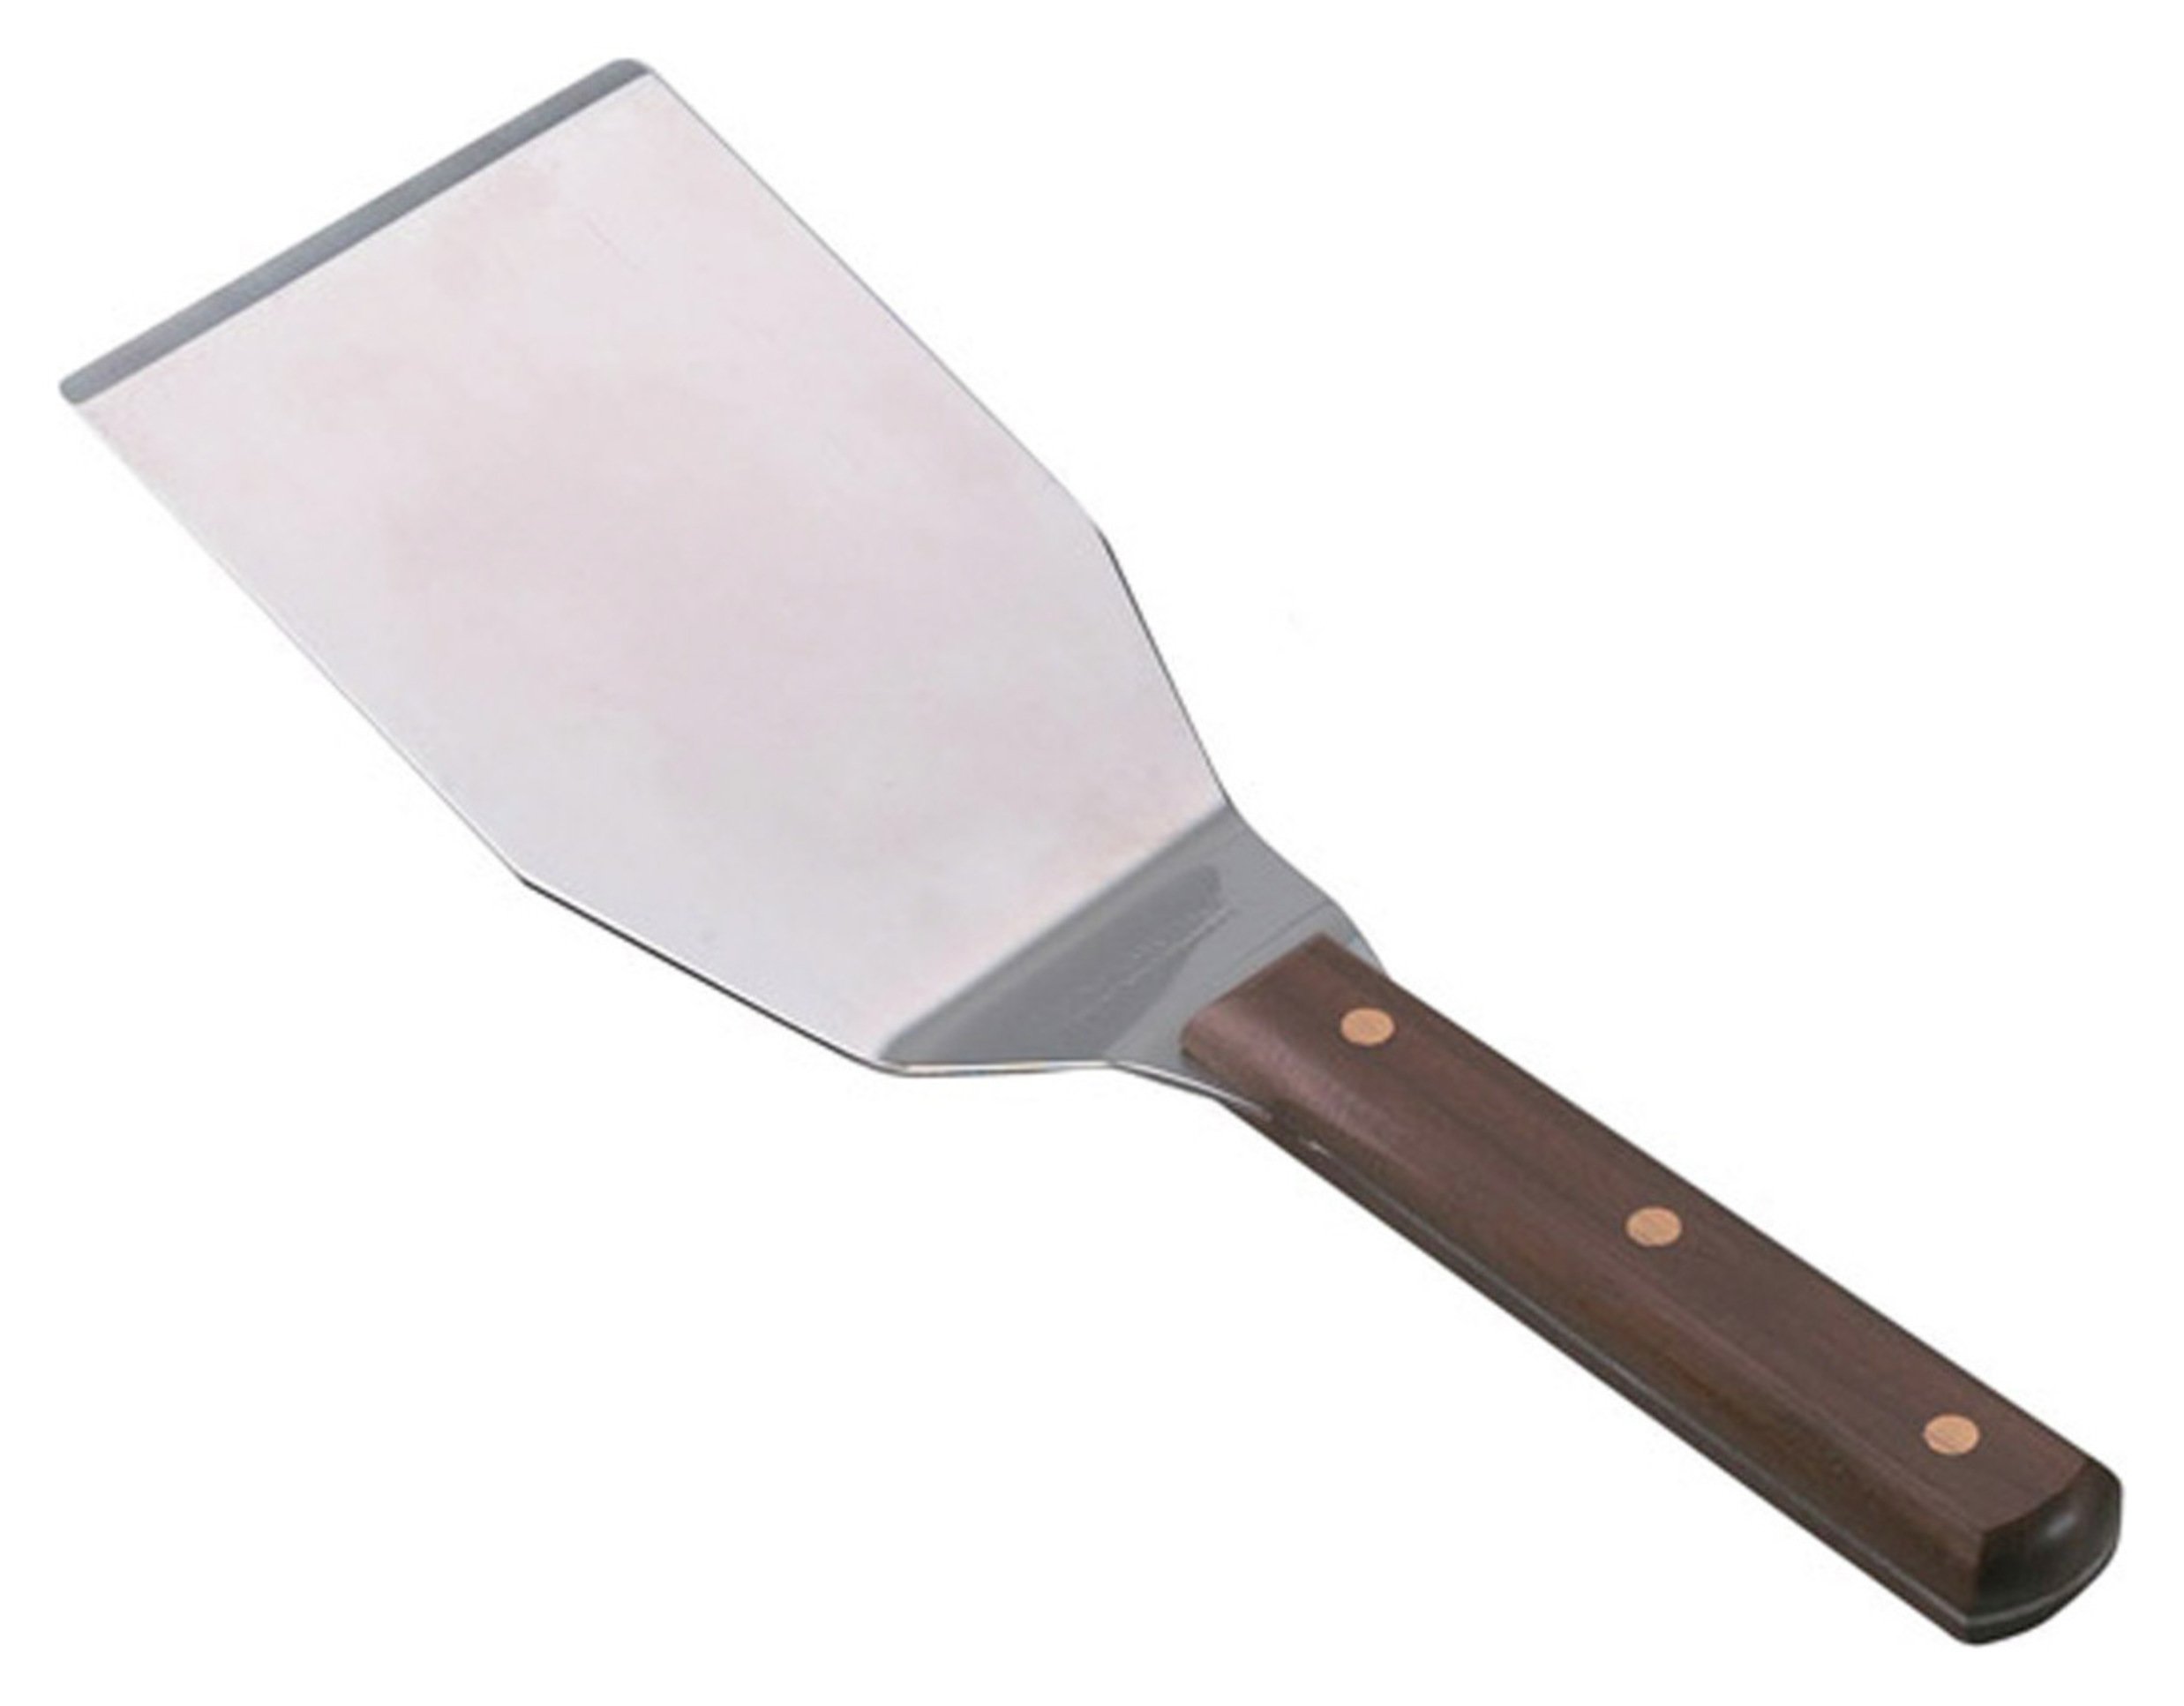 Zodiac 15cm Turner with Wooden Handle - Stainless Steel